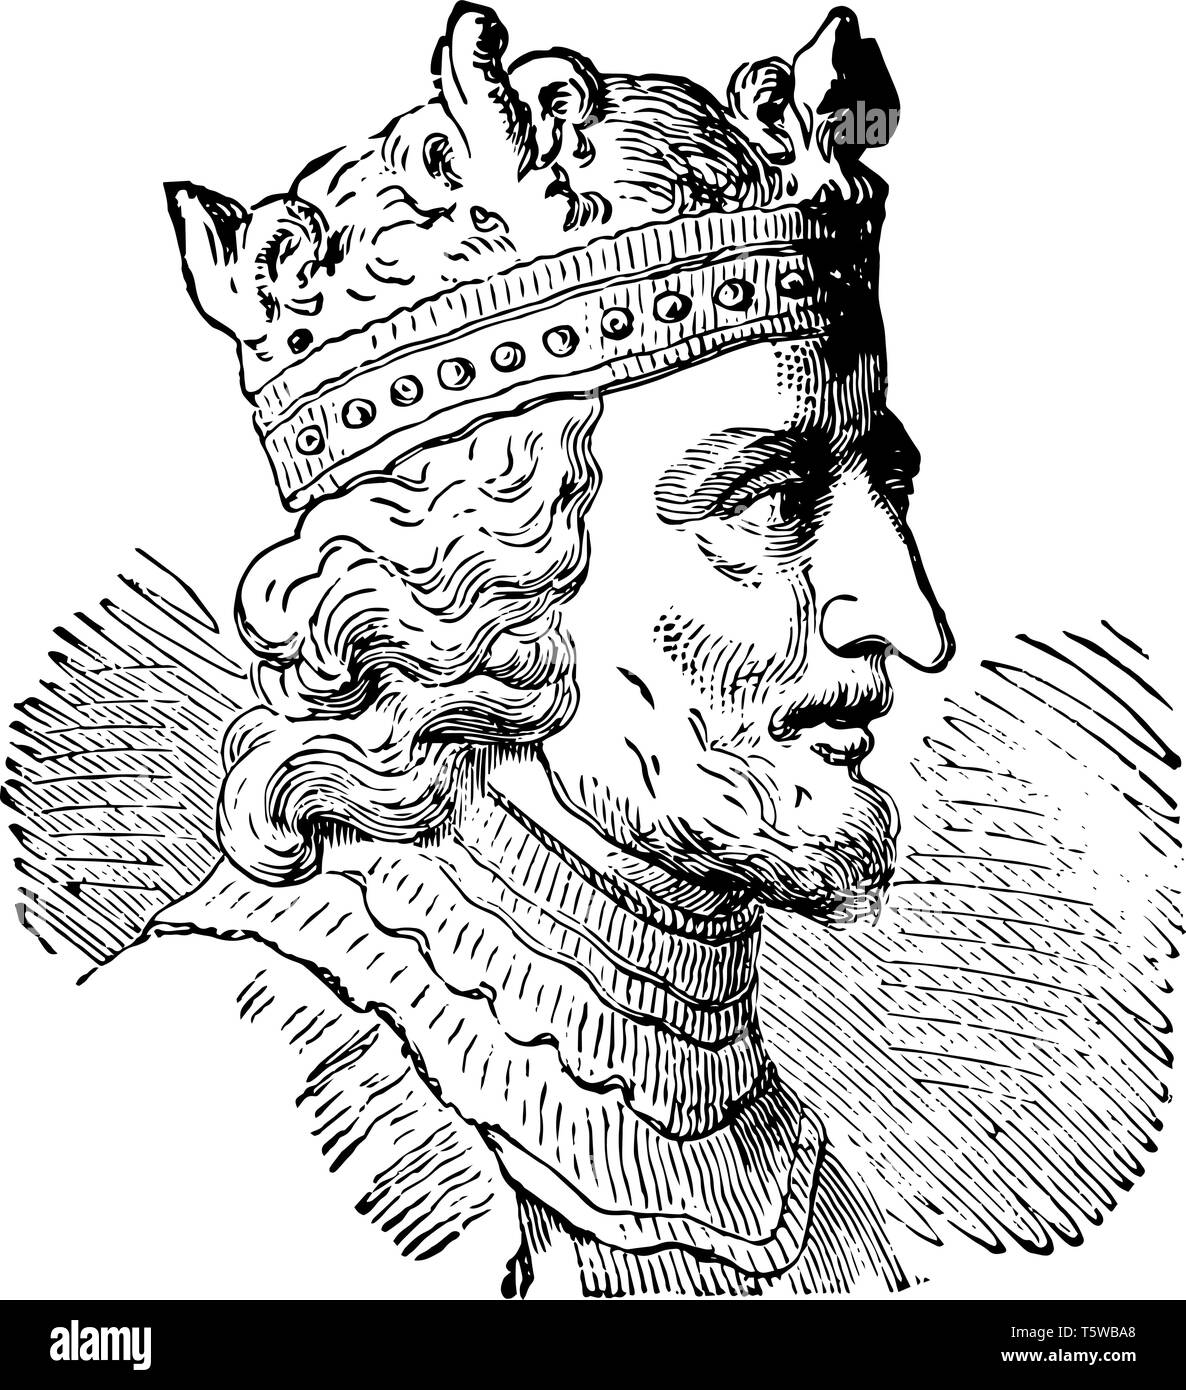 Stephen I of Hungary, he was the last grand prince of the Hungarians and the first King of Hungary, vintage line drawing or engraving illustration Stock Vector